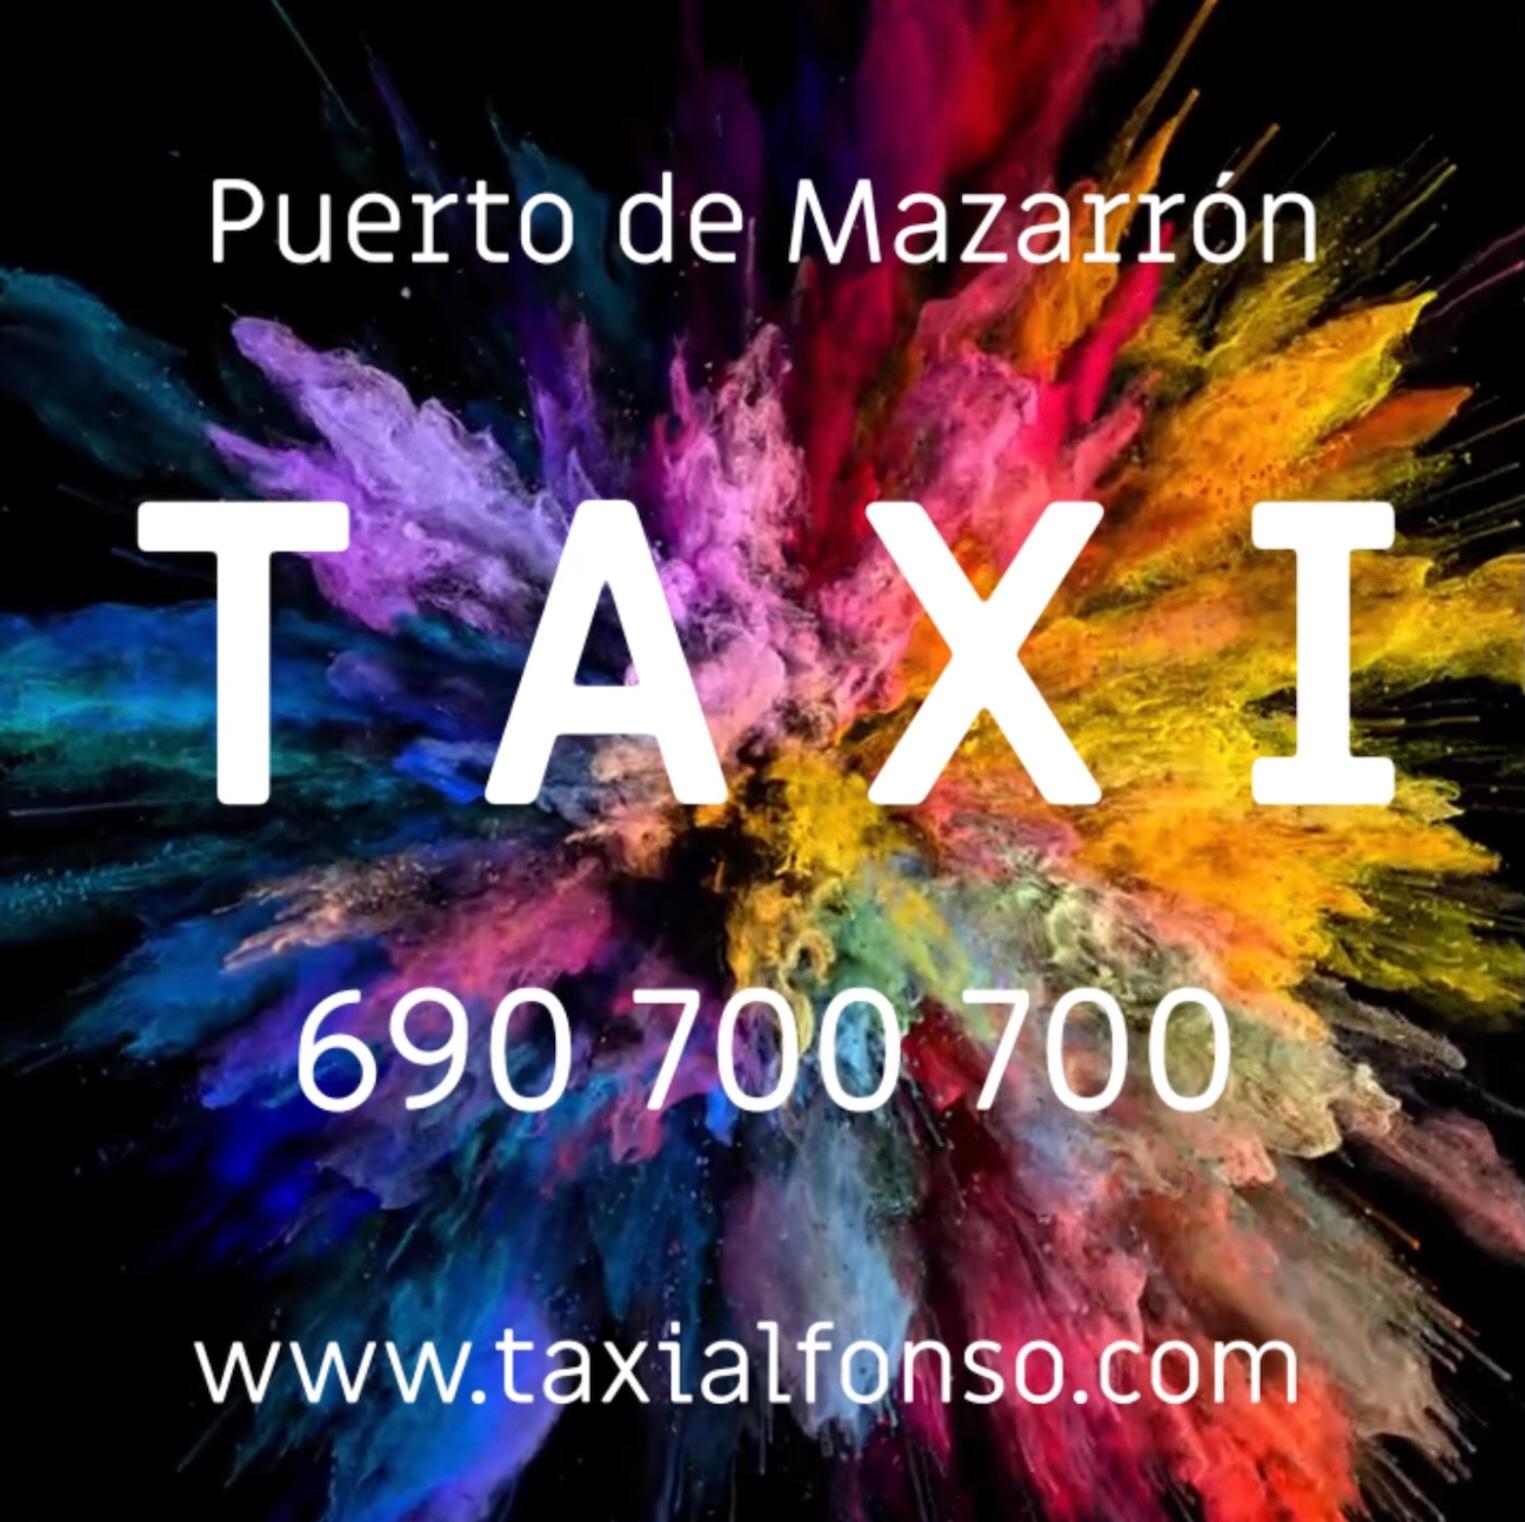 Images Taxi Alfonso Garcia